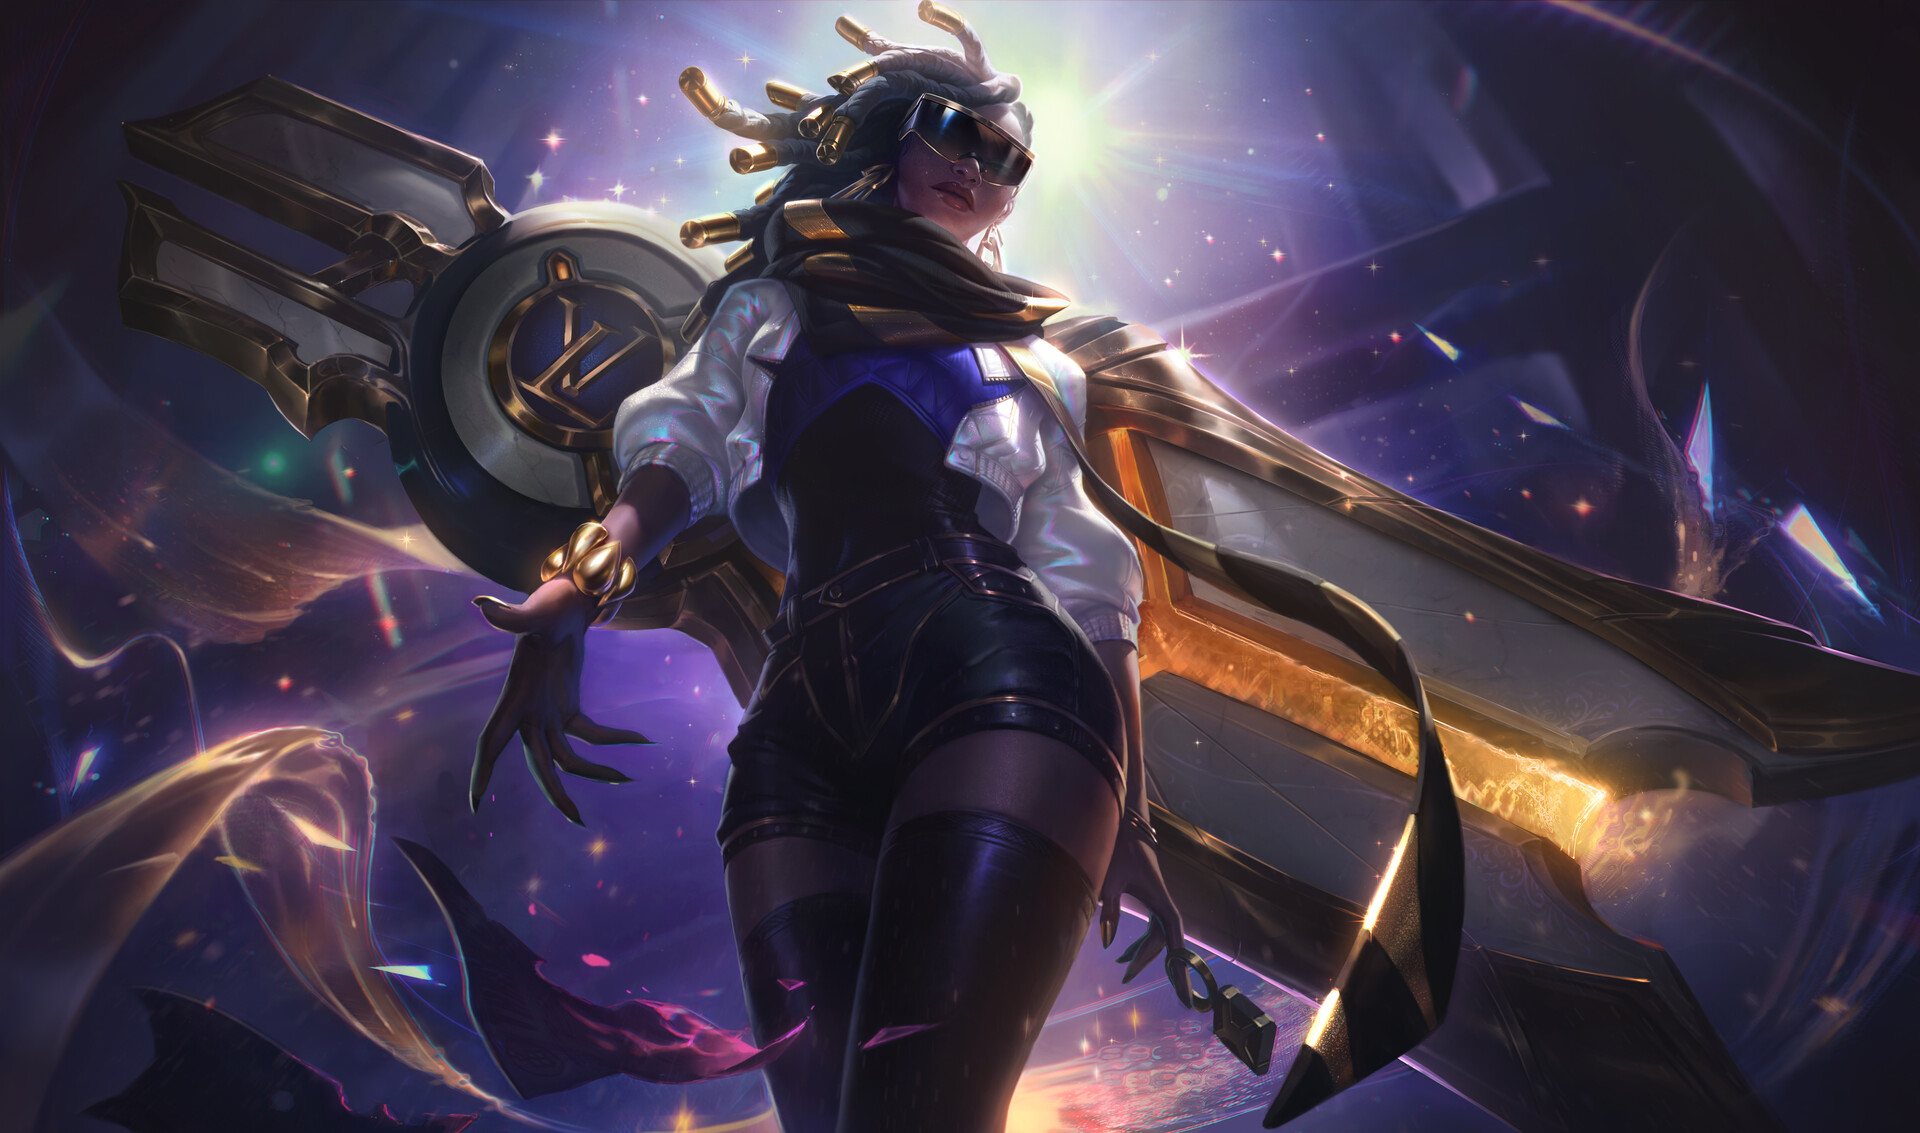 20 Senna League of Legends HD Wallpapers and Backgrounds